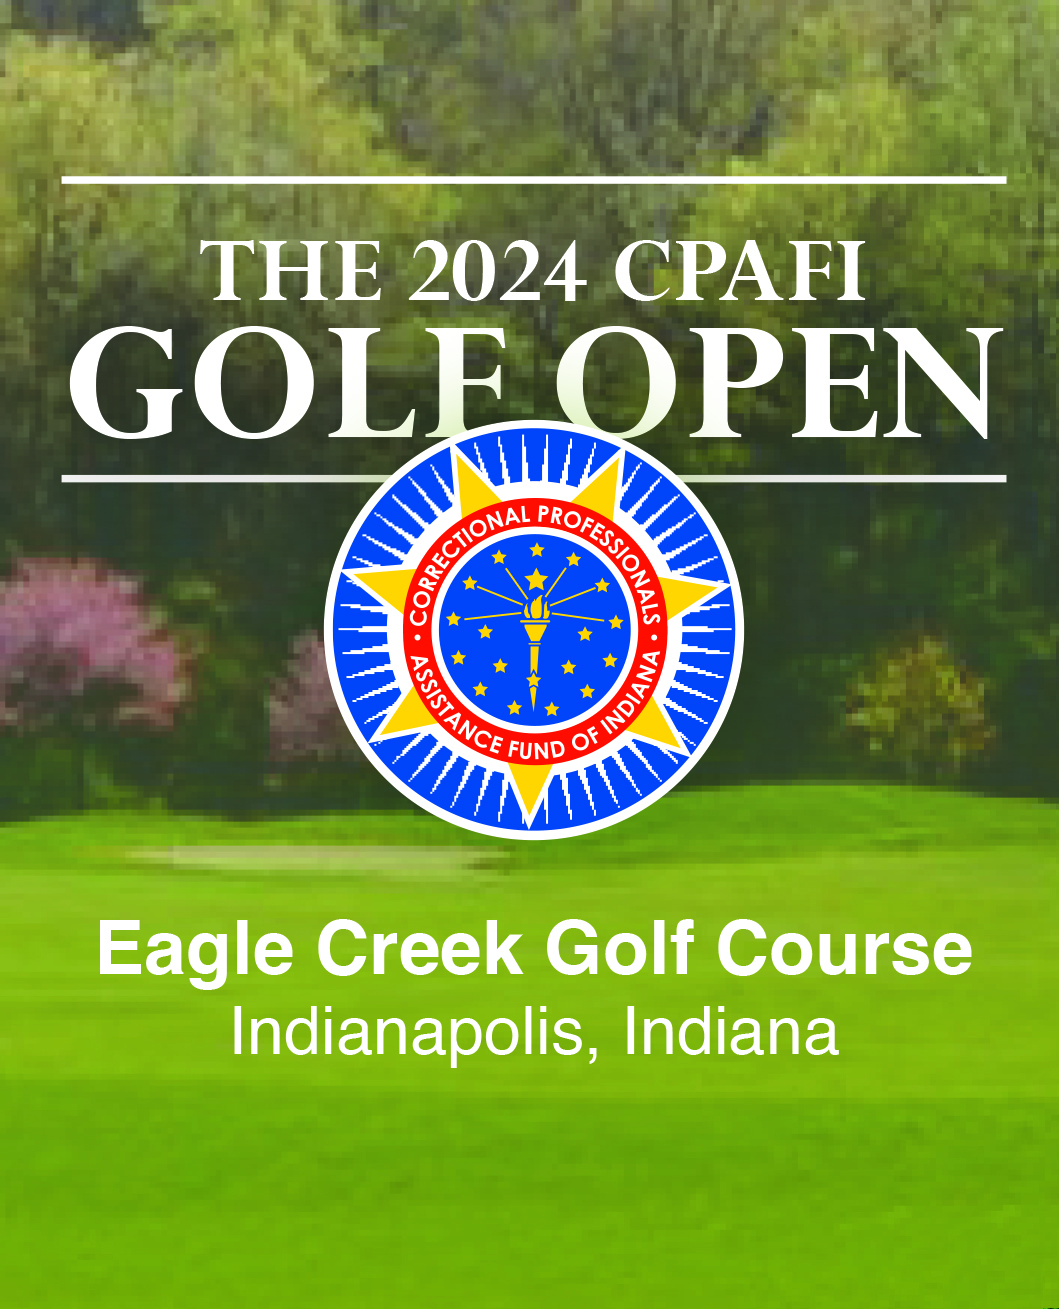 CPAFI 2024 Golf Open at Eagle Creek Park in Indianapolis